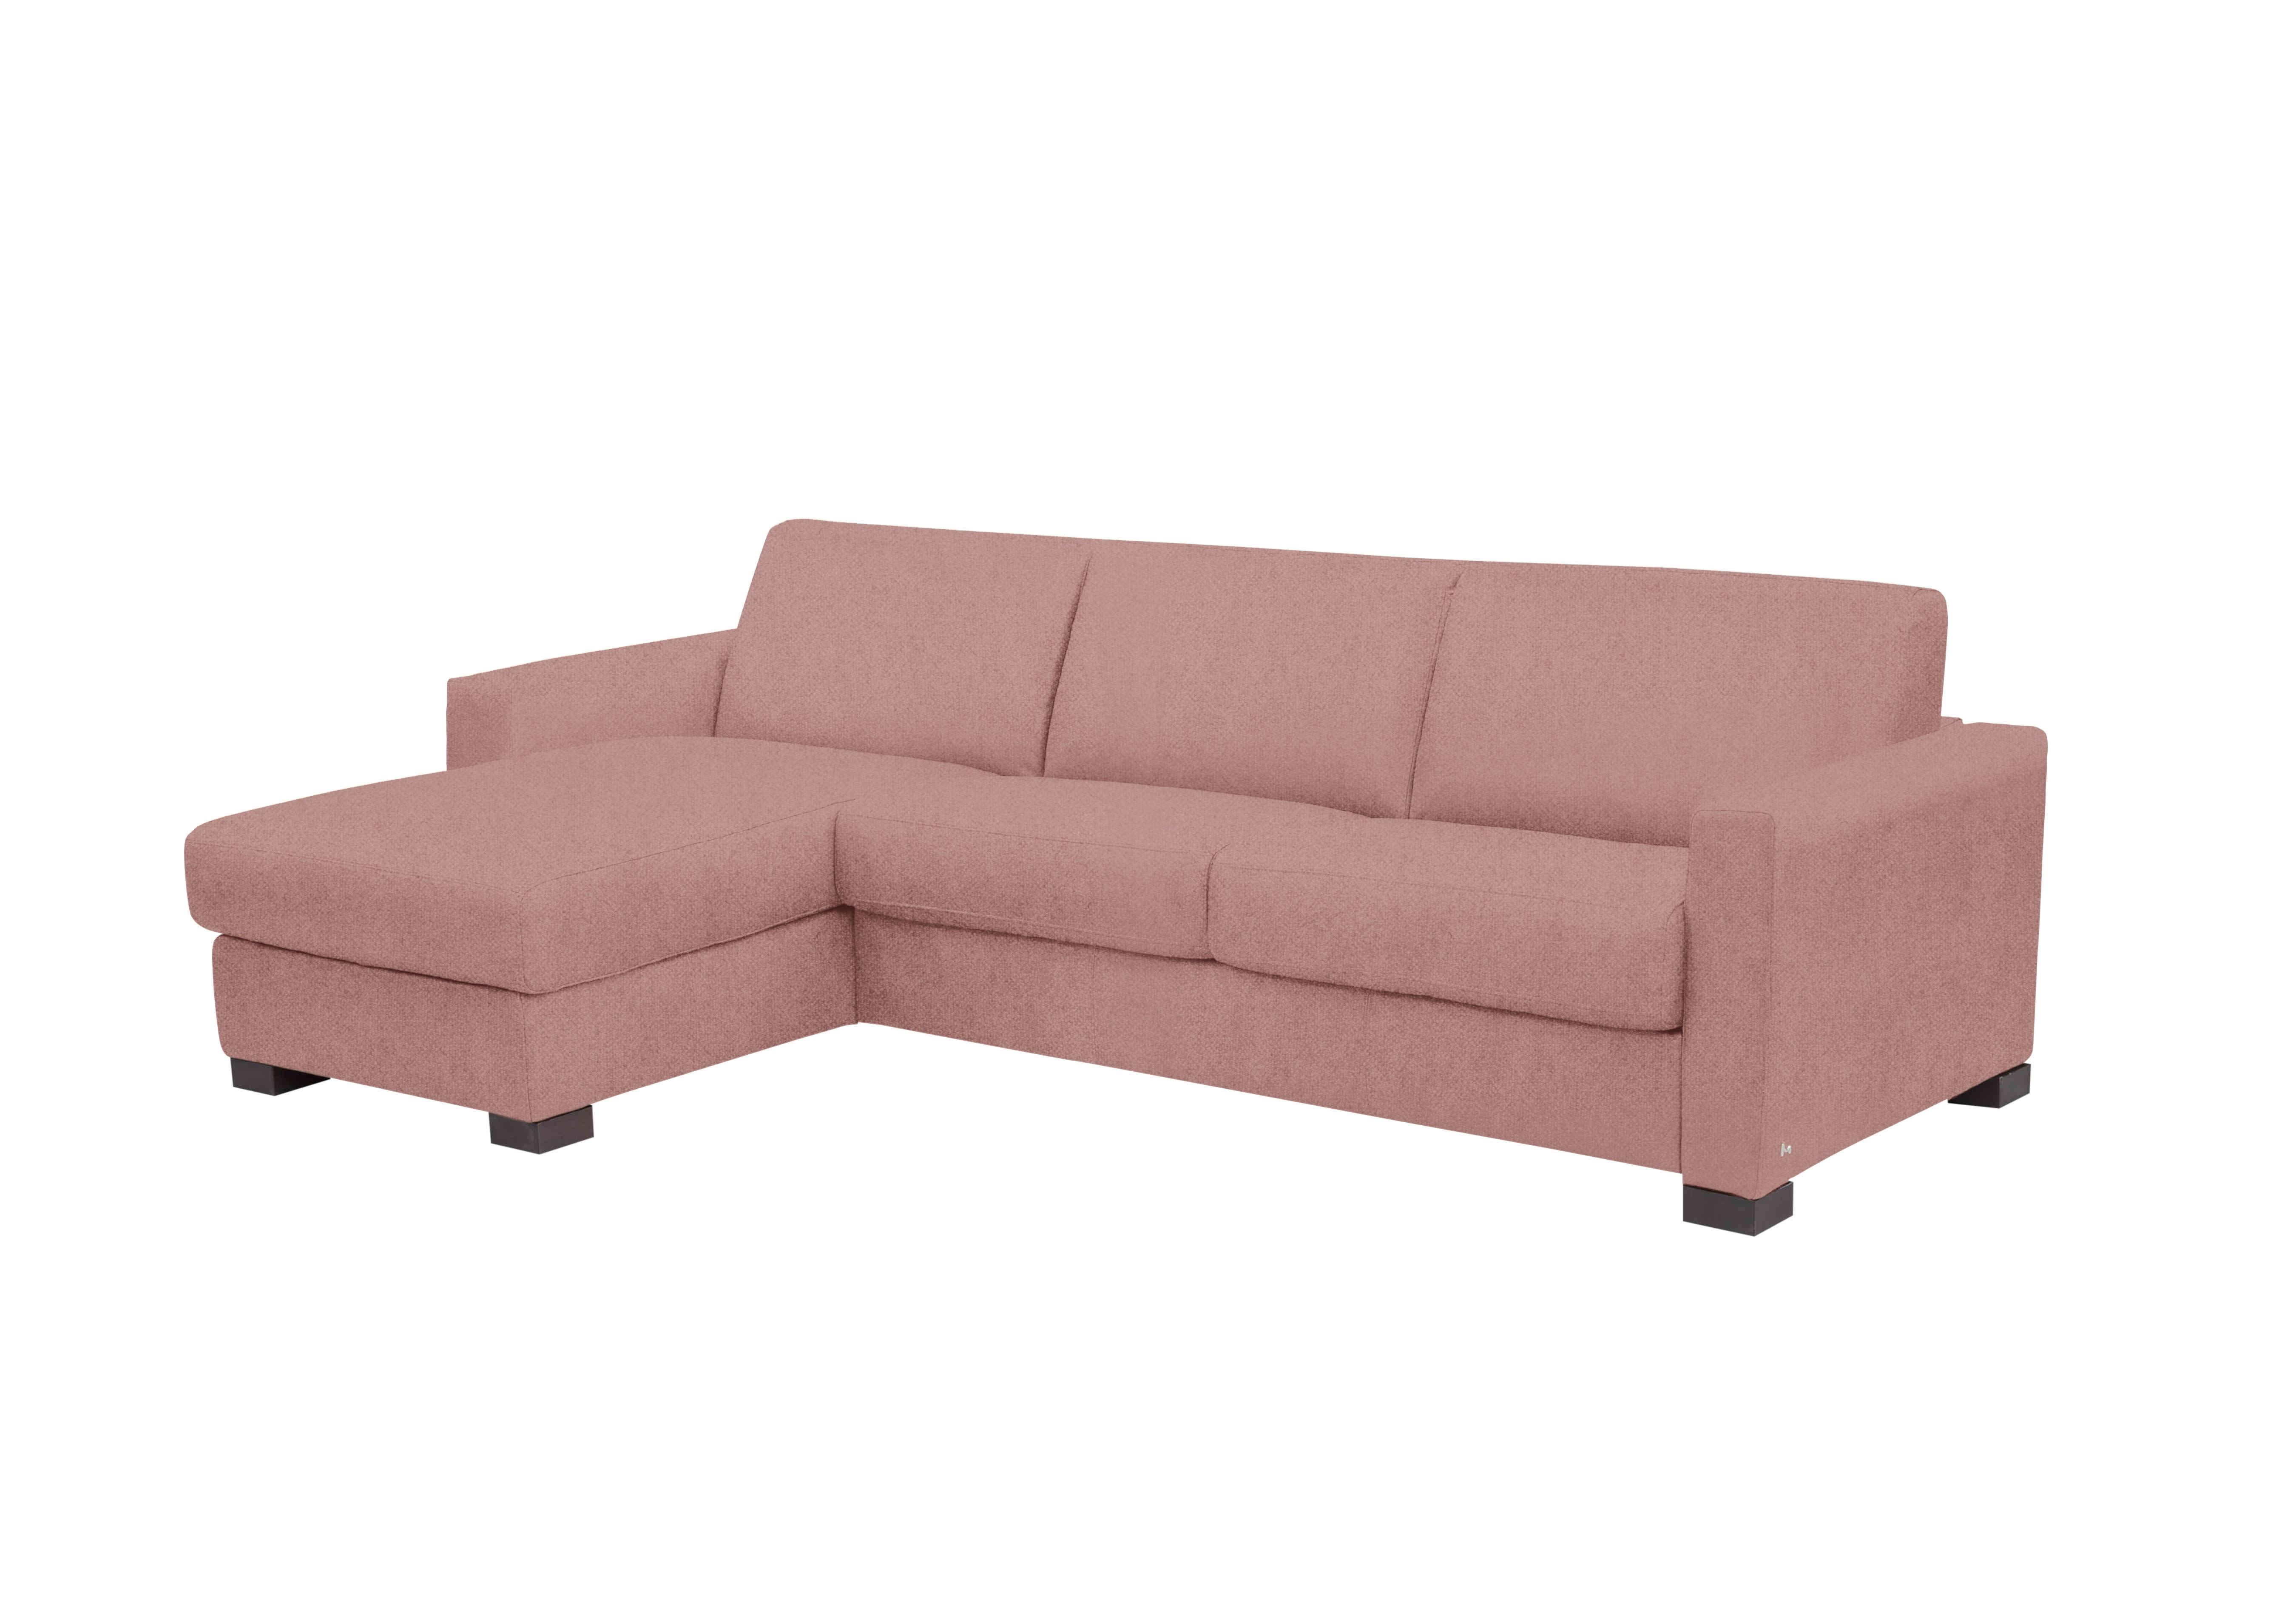 Alcova 3 Seater Fabric Sofa Bed with Storage Chaise with Box Arms in Fuente Coral on Furniture Village